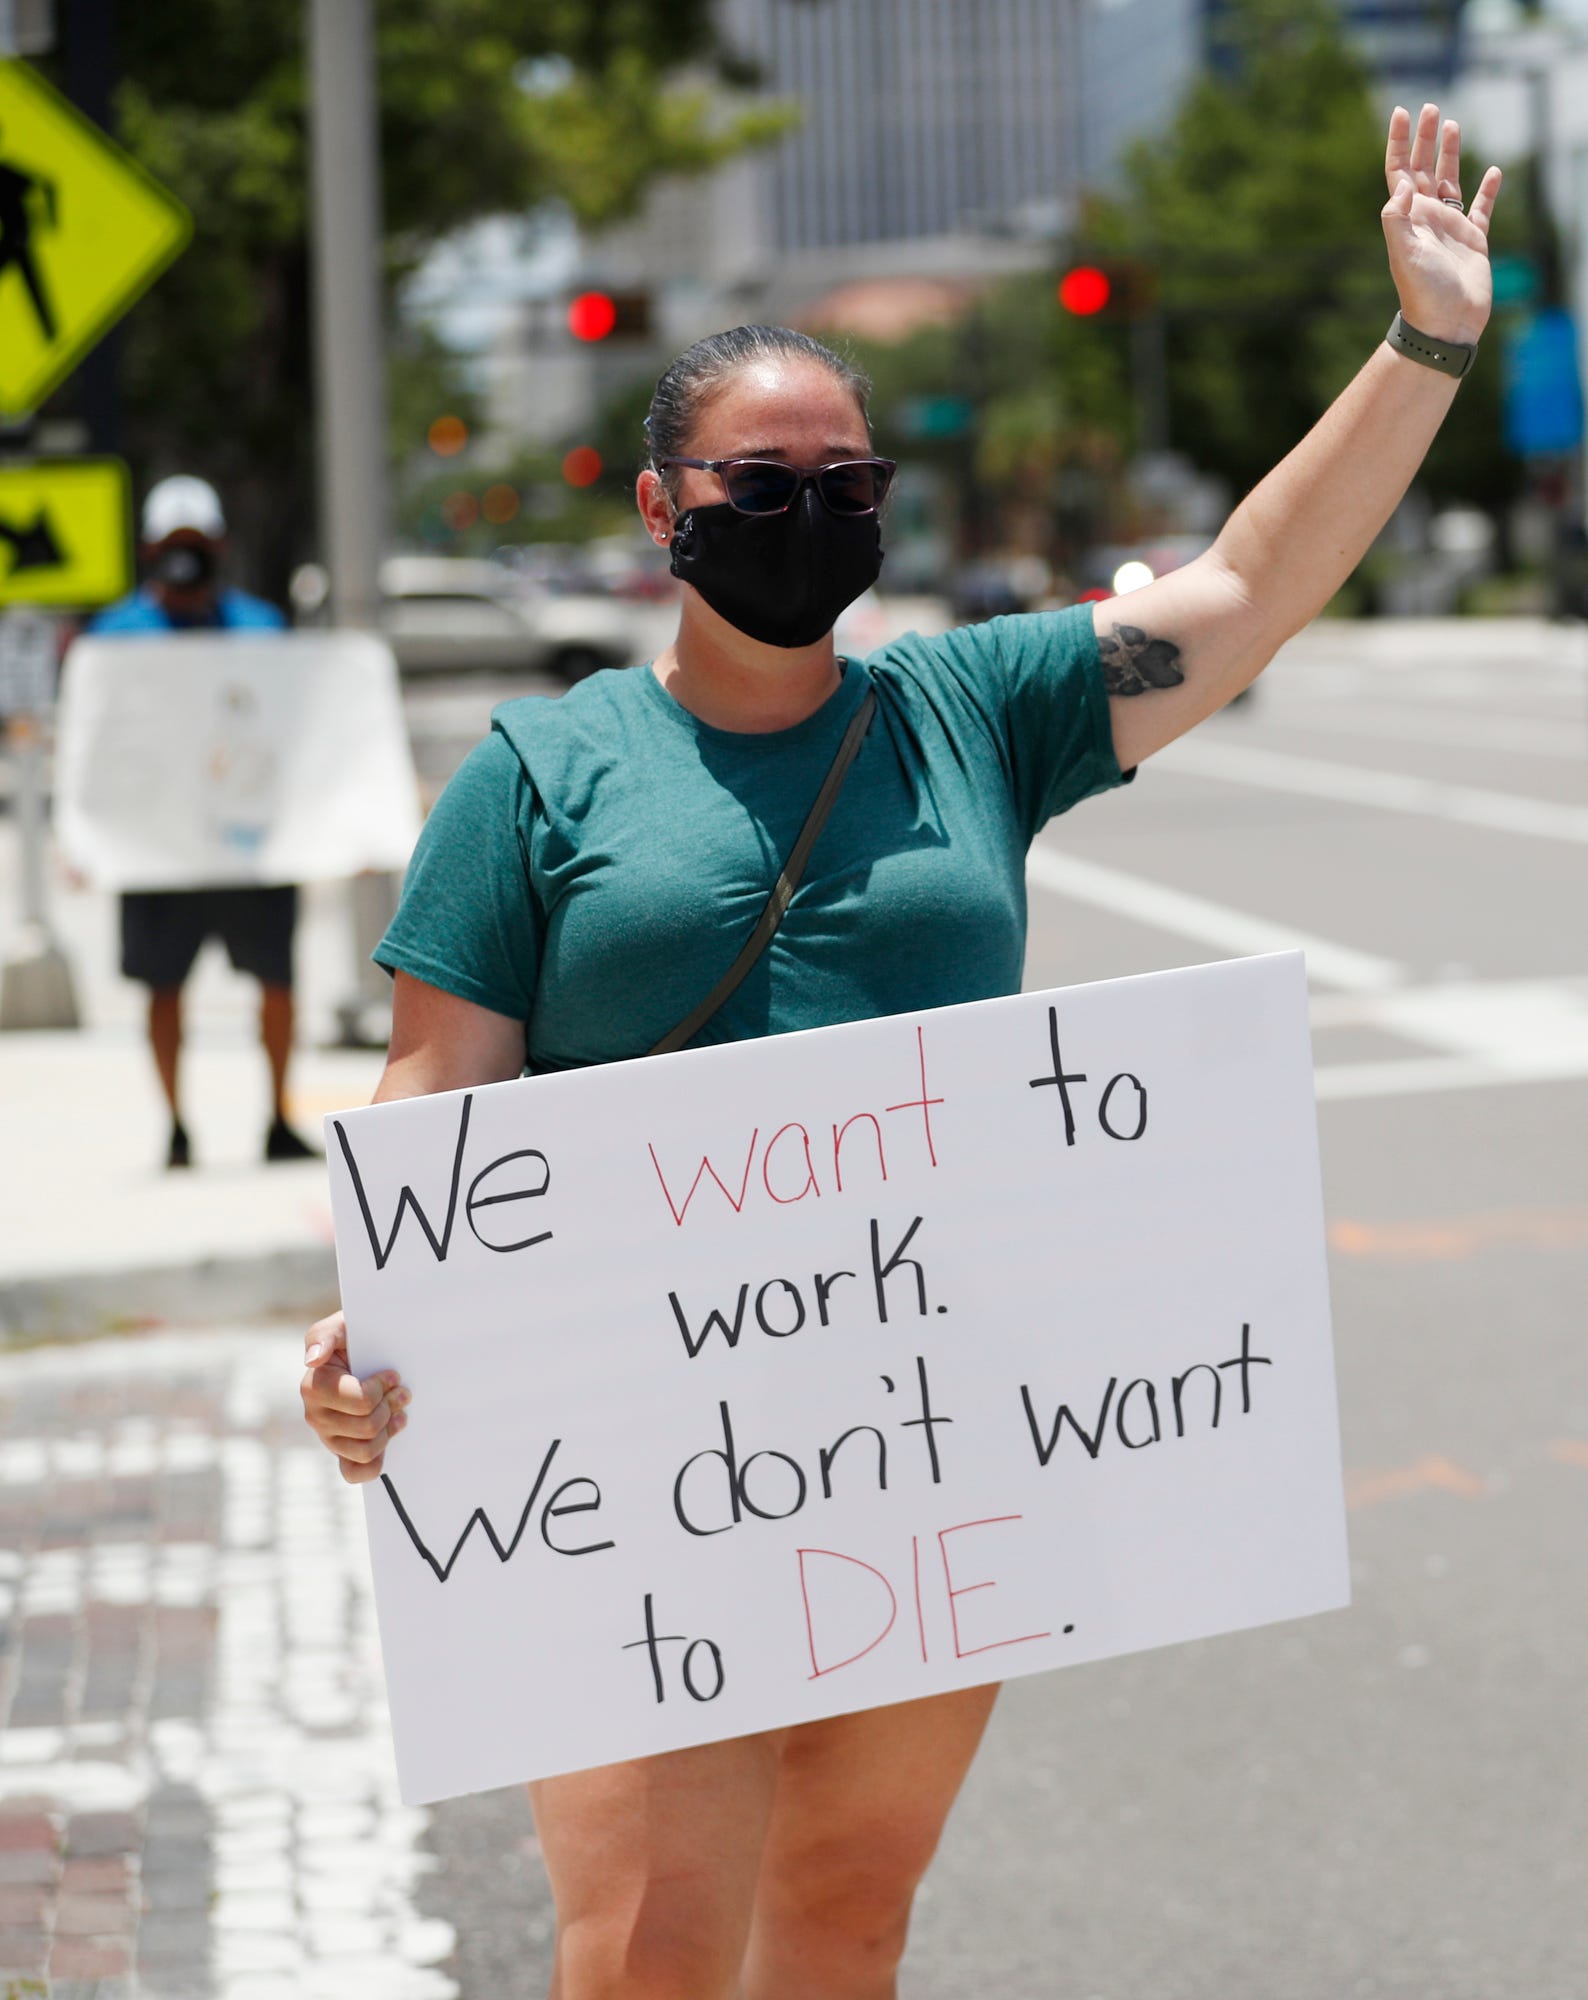 Middle school teacher Danielle Weigand stands in protest in front of the Hillsborough County Schools District Office on July 16, 2020, in Tampa, Fla. Teachers and administrators from Hillsborough County Schools rallied against the reopening of schools due to health and safety concerns amid the COVID-19 pandemic.